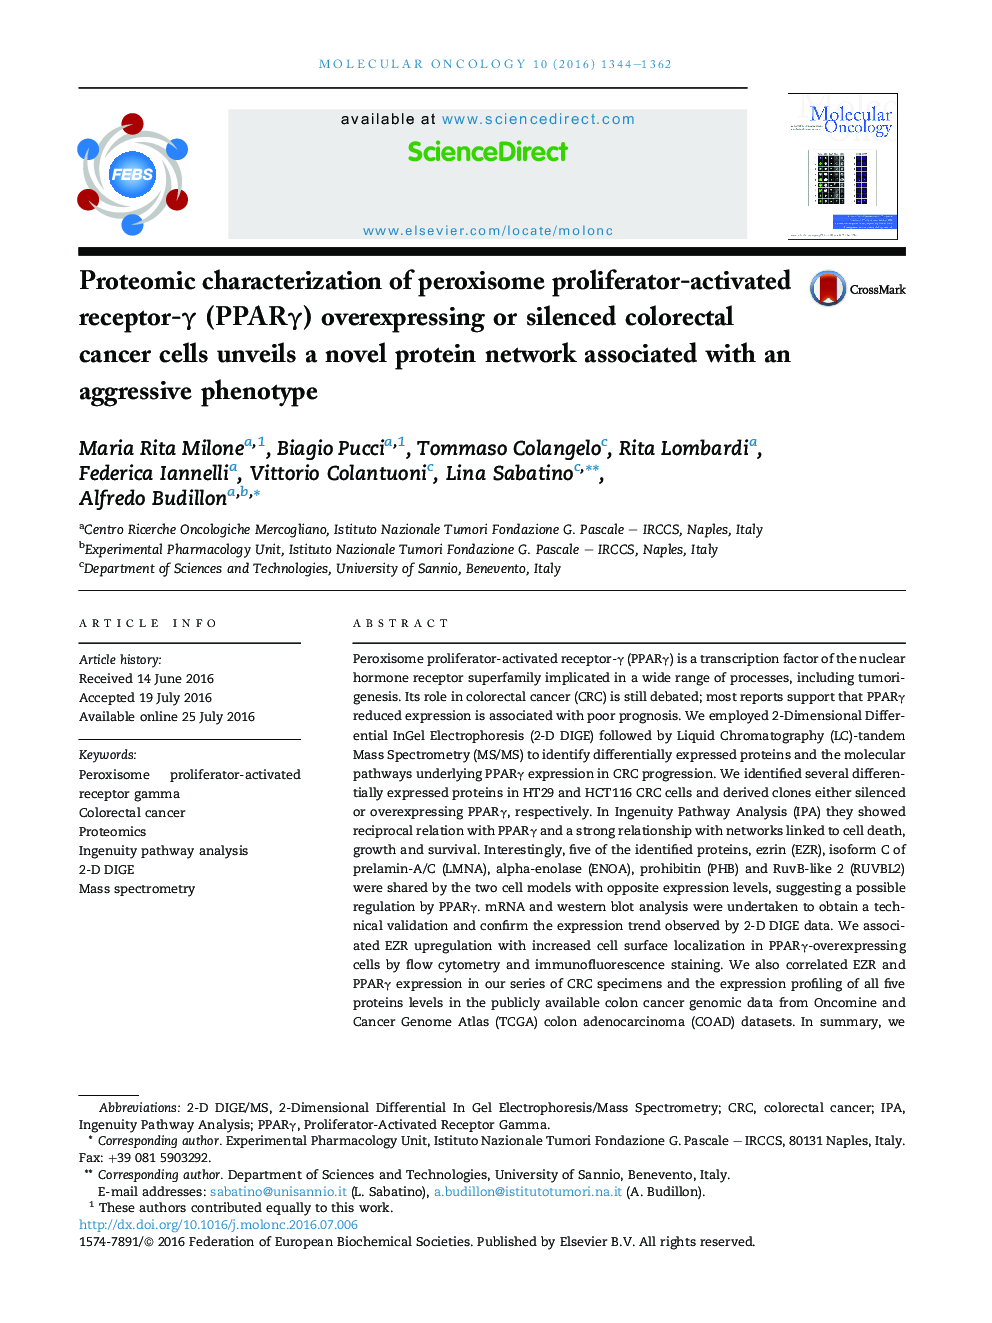 Proteomic characterization of peroxisome proliferator-activated receptor-Î³ (PPARÎ³) overexpressing or silenced colorectal cancer cells unveils a novel protein network associated with an aggressive phenotype